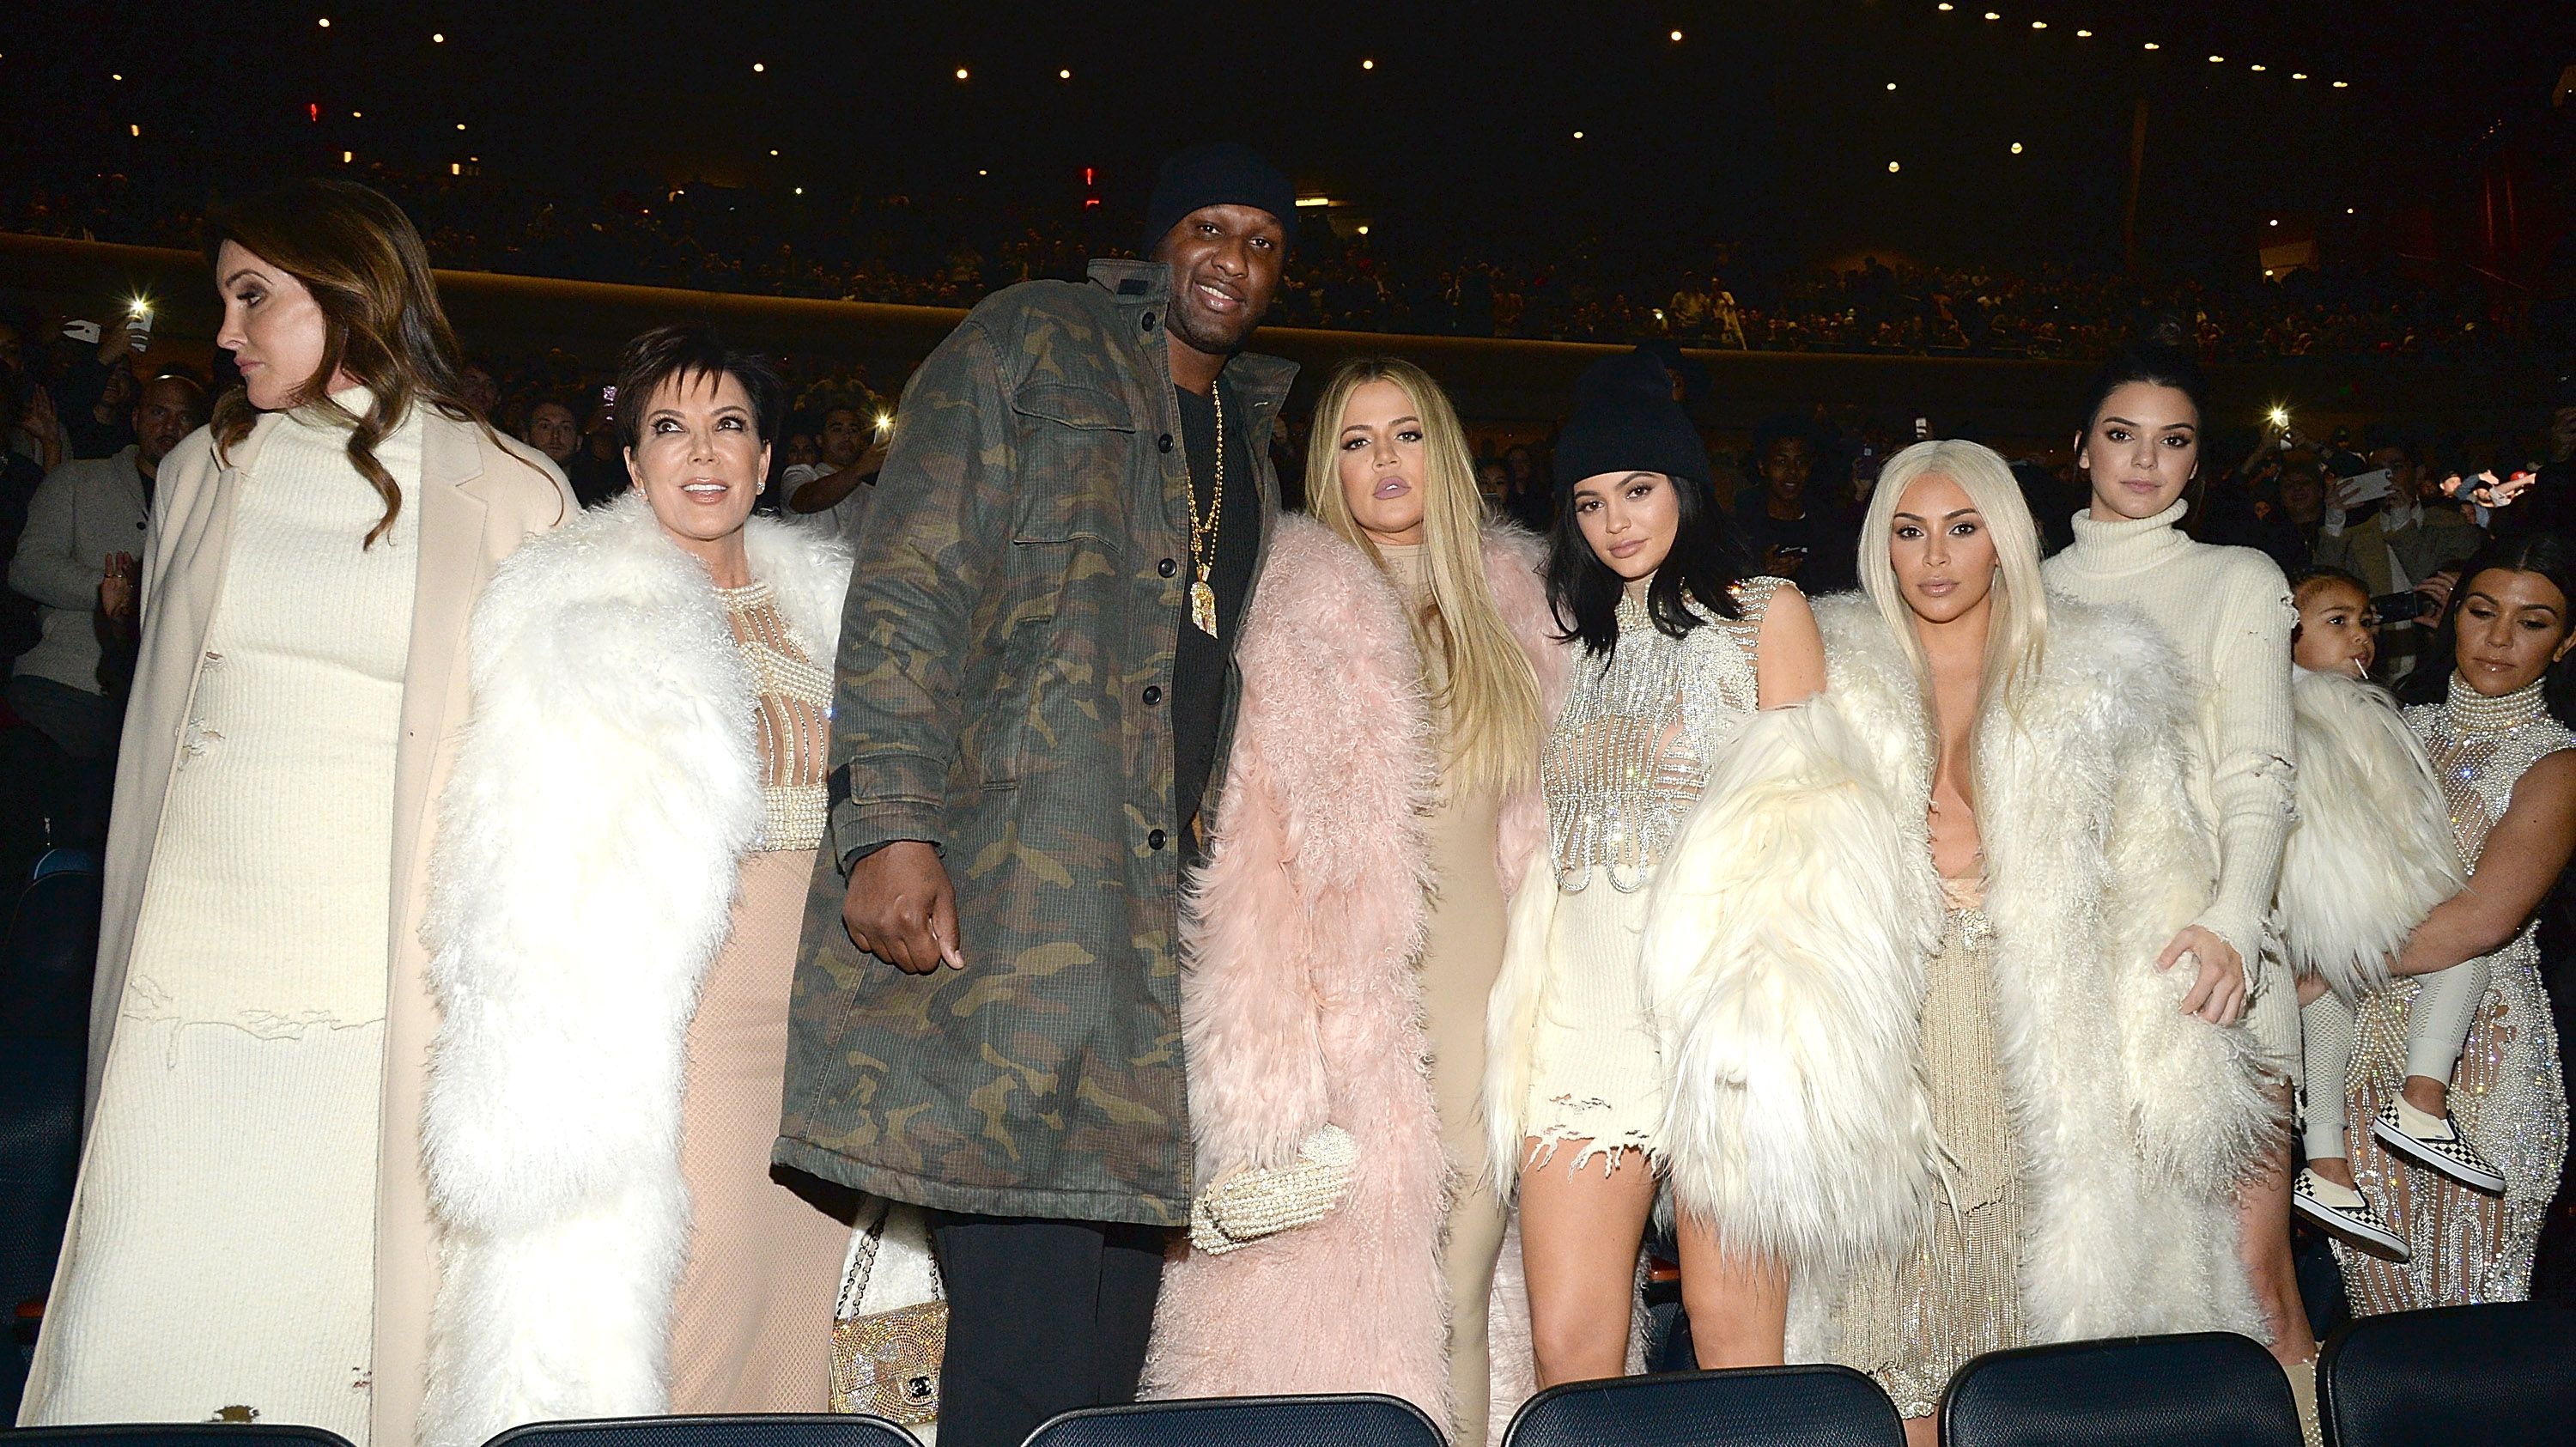 Lamar Odom and ex-wife Khloe and the Kardashian family at Kanye West Yeezy Season 3 at Madison Square Garden in 2016/ Source: Getty Images